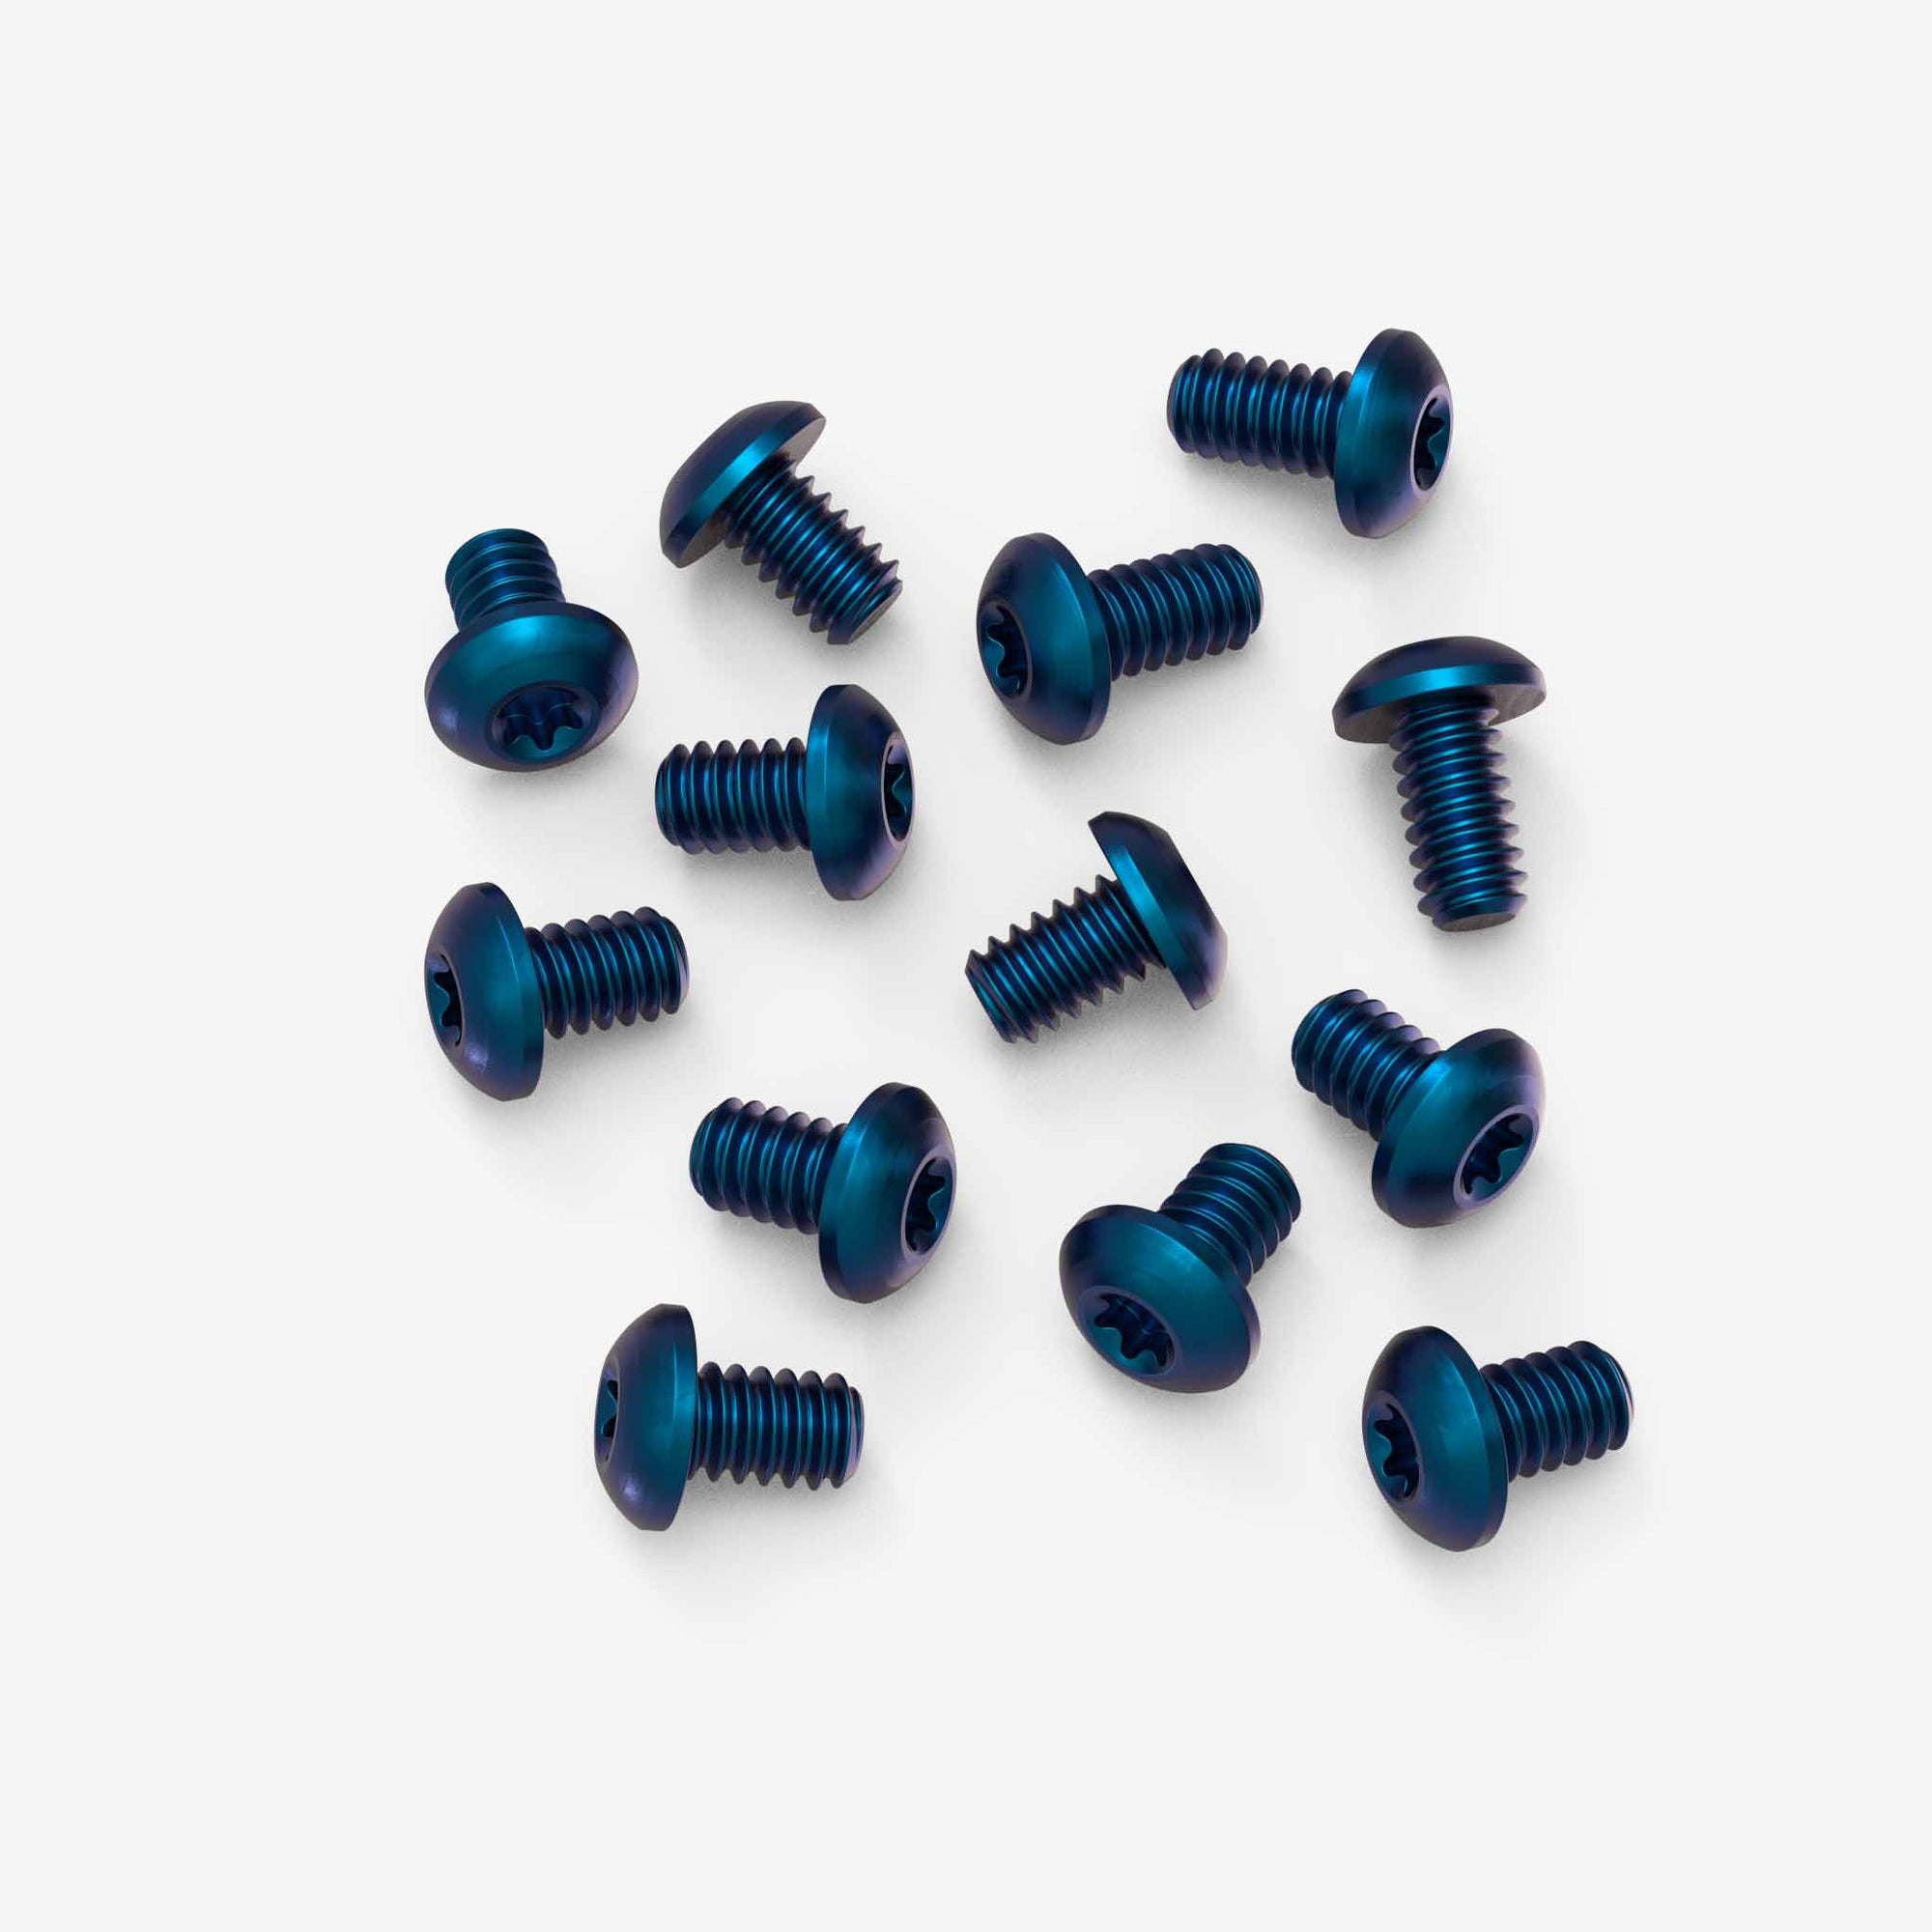 Set of 13 Titanium Body Screws for Benchmade Taggedout-Dark Blue Anodize